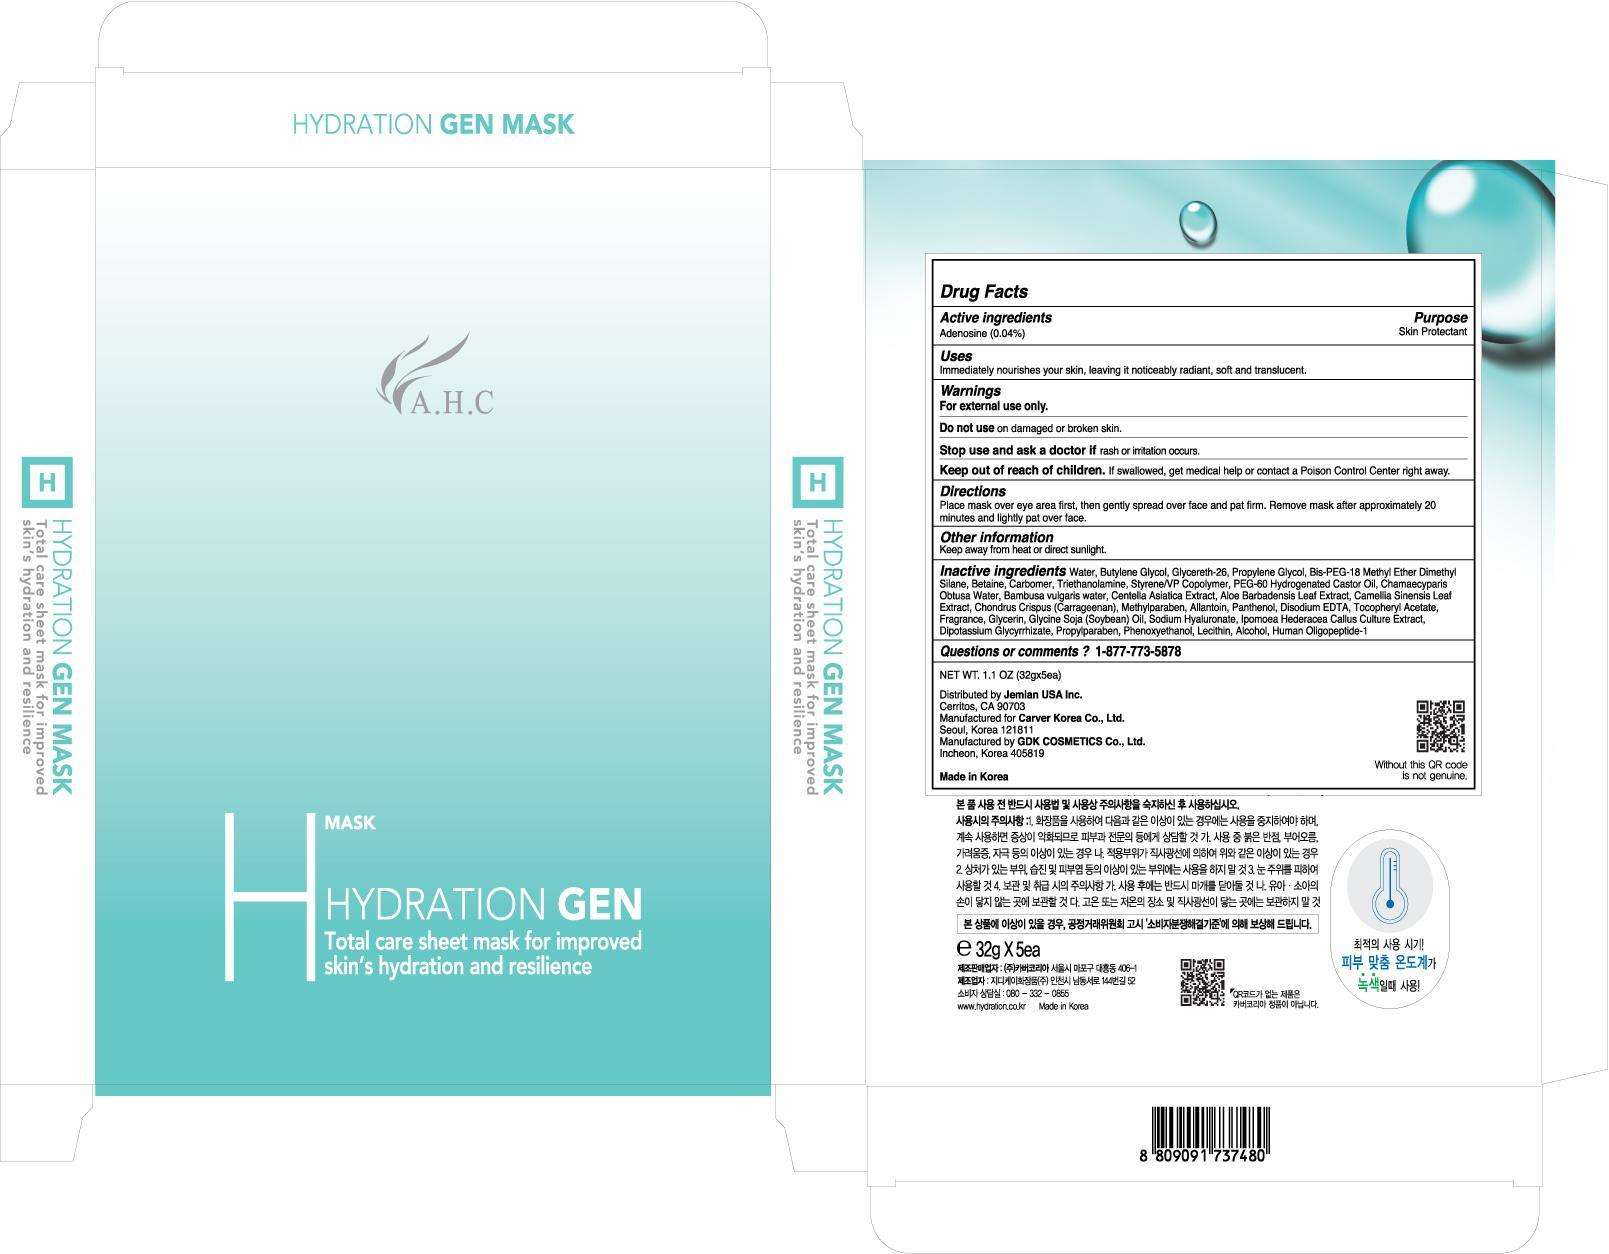 AHC Hydration Special Gen Mask